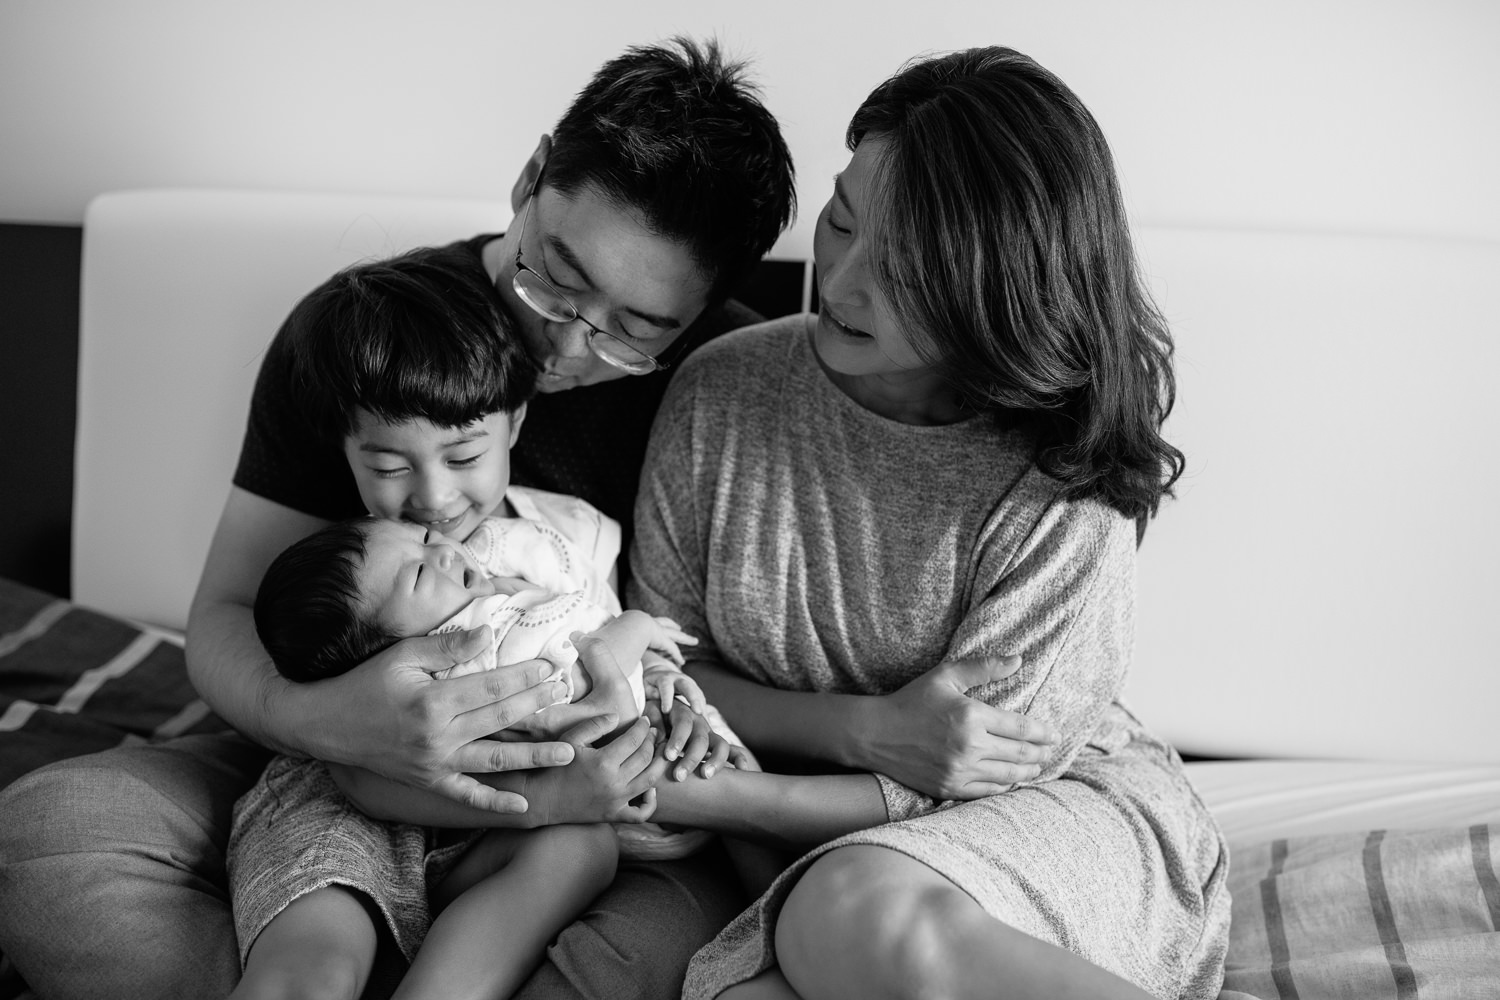 family of 4 sitting on bed, 3 year old toddler boy sitting in dad's lap holding 2 week old baby brother, mom snuggled next to them - Newmarket Lifestyle Photography